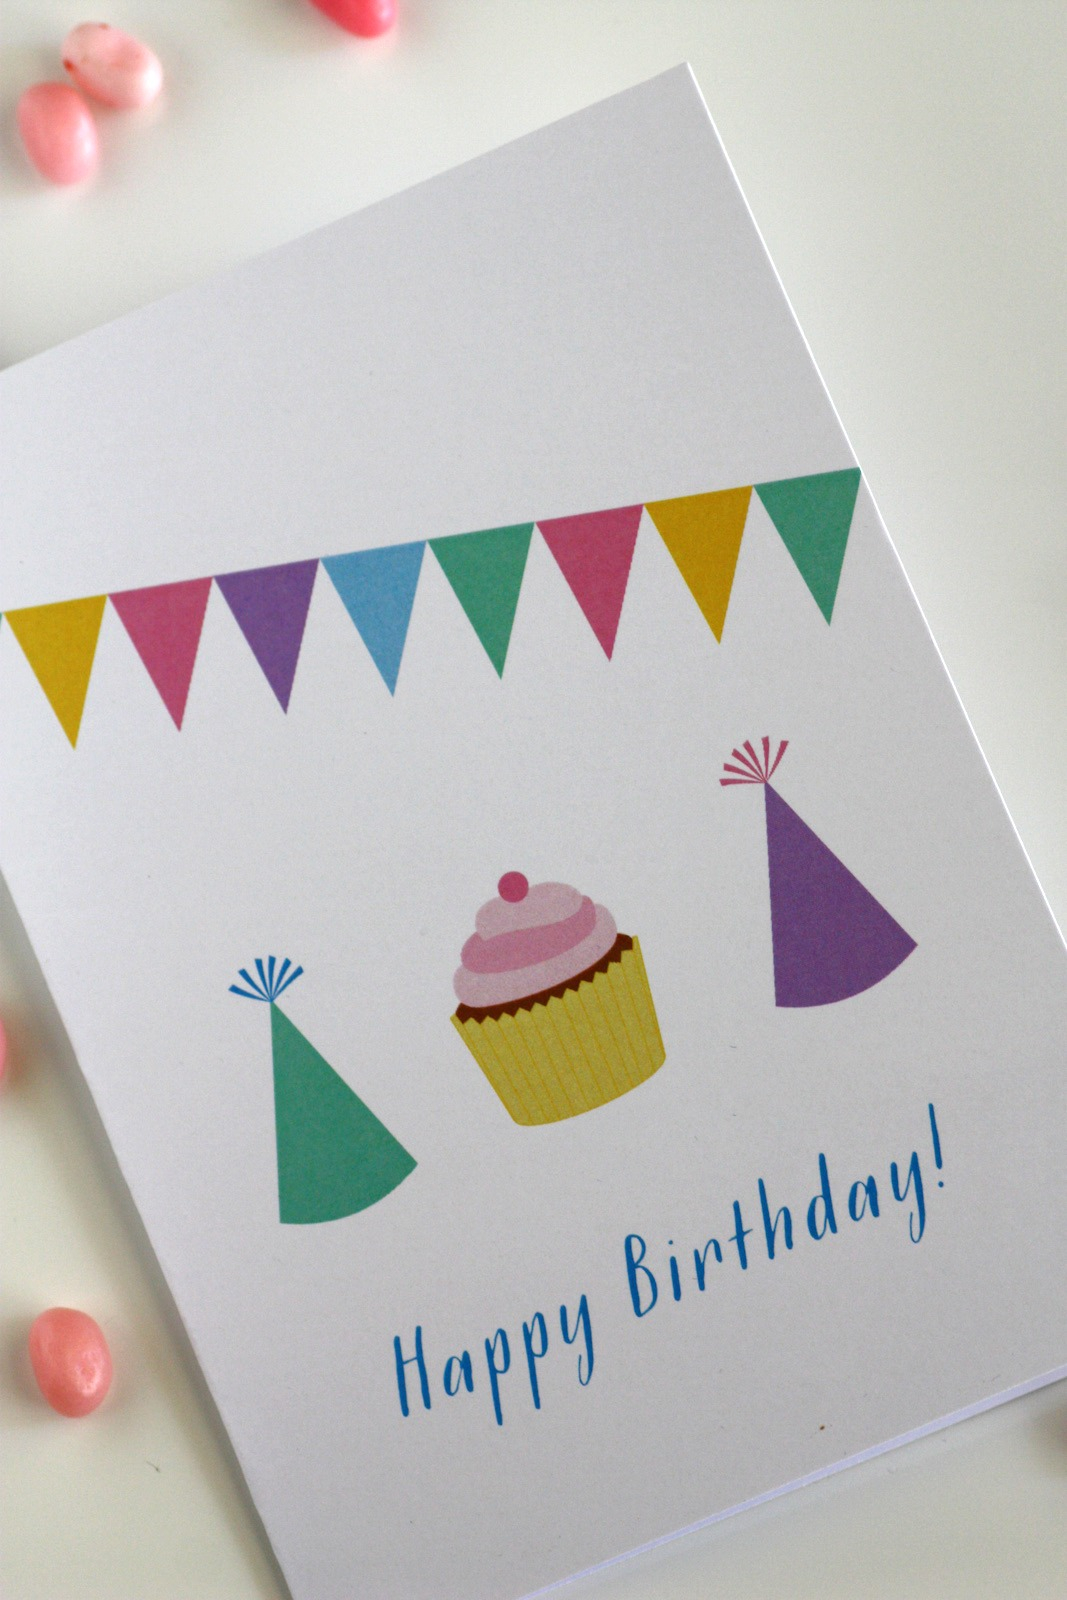 Download These Fun Free Printable Blank Birthday Cards Now 